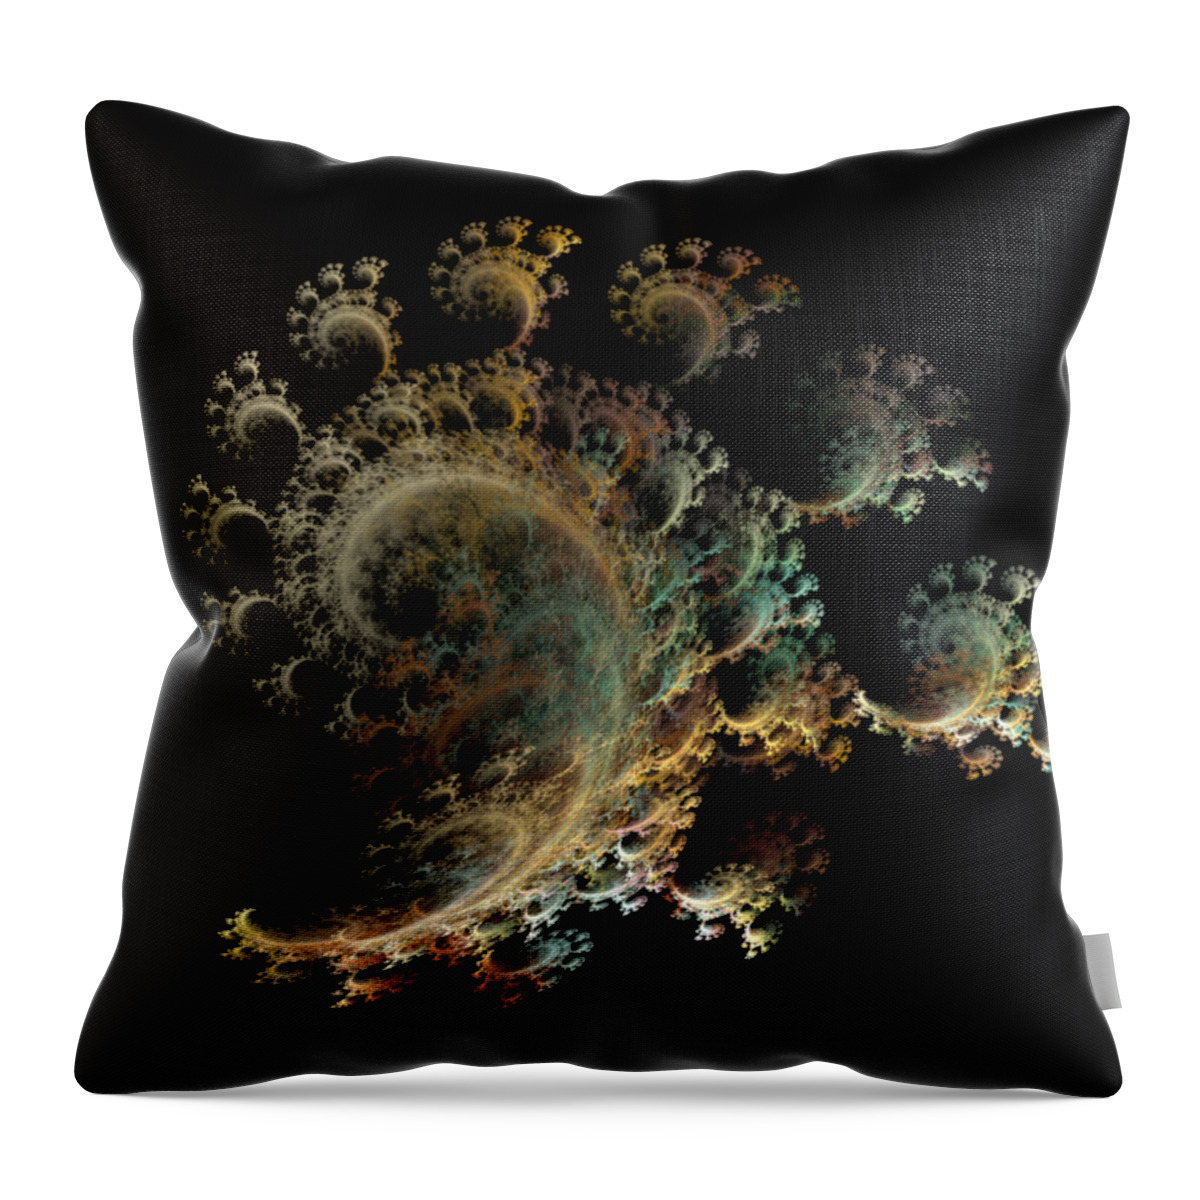 Fractal Throw Pillow featuring the digital art Nautical Symbols Spiraling Finger Corals by Betsy Knapp